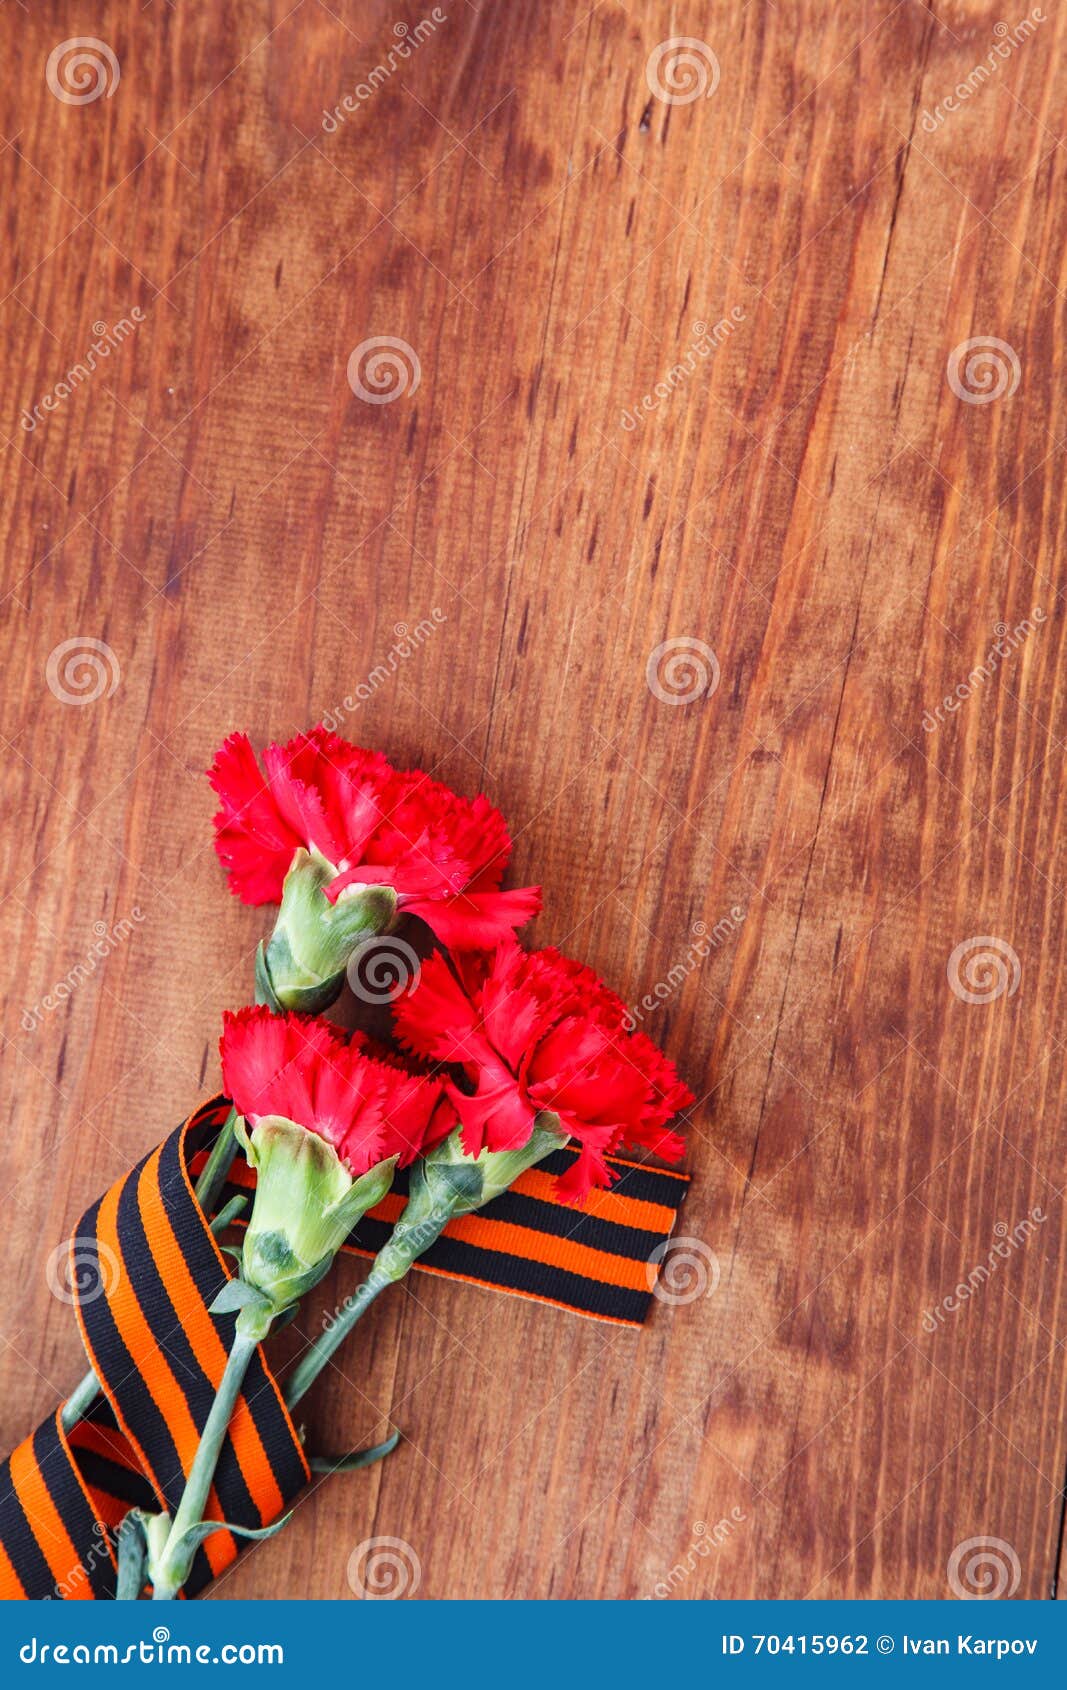 Symbols of Victory in Great Patriotic War three red flower and George ribbon on wooden table. Three red flower Symbols of Victory in Great Patriotic War on wooden,Victory Day. 9 May. selective focus image